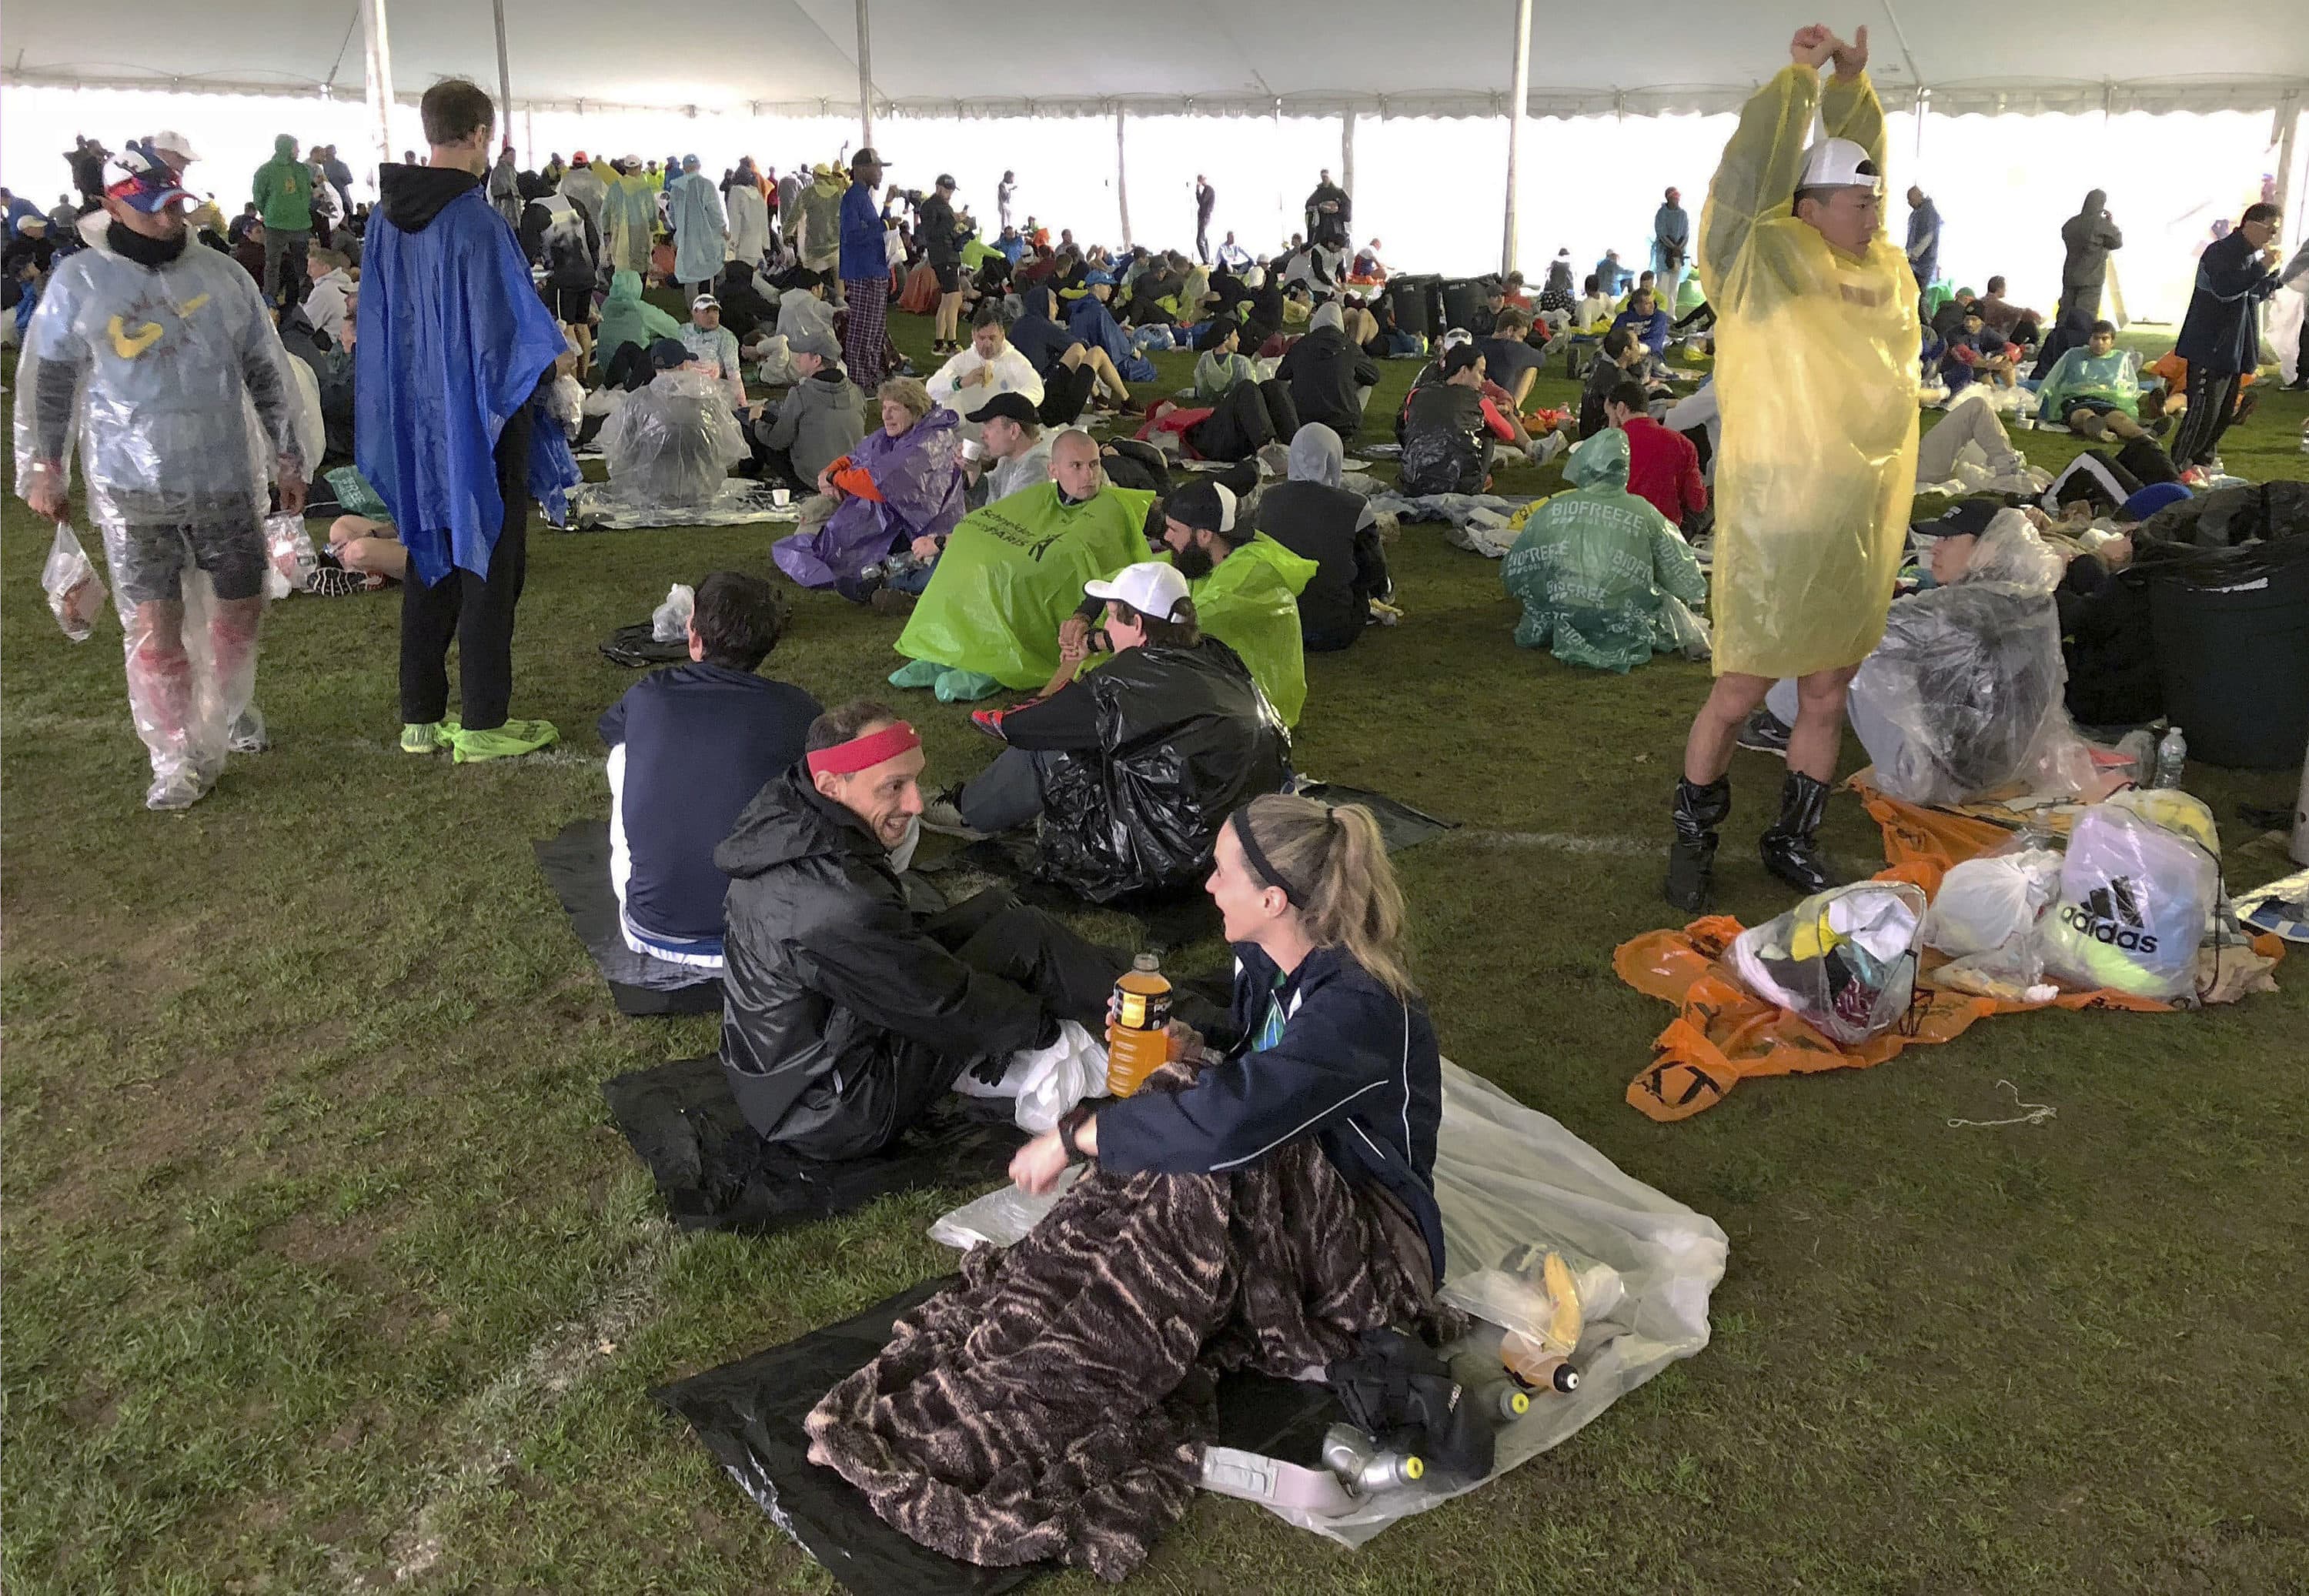 In this April 15, 2019 photo, runners wait under a tent while it rains before the start of the 123rd Boston Marathon in Hopkinton, Mass. (Jennifer McDermott/AP)